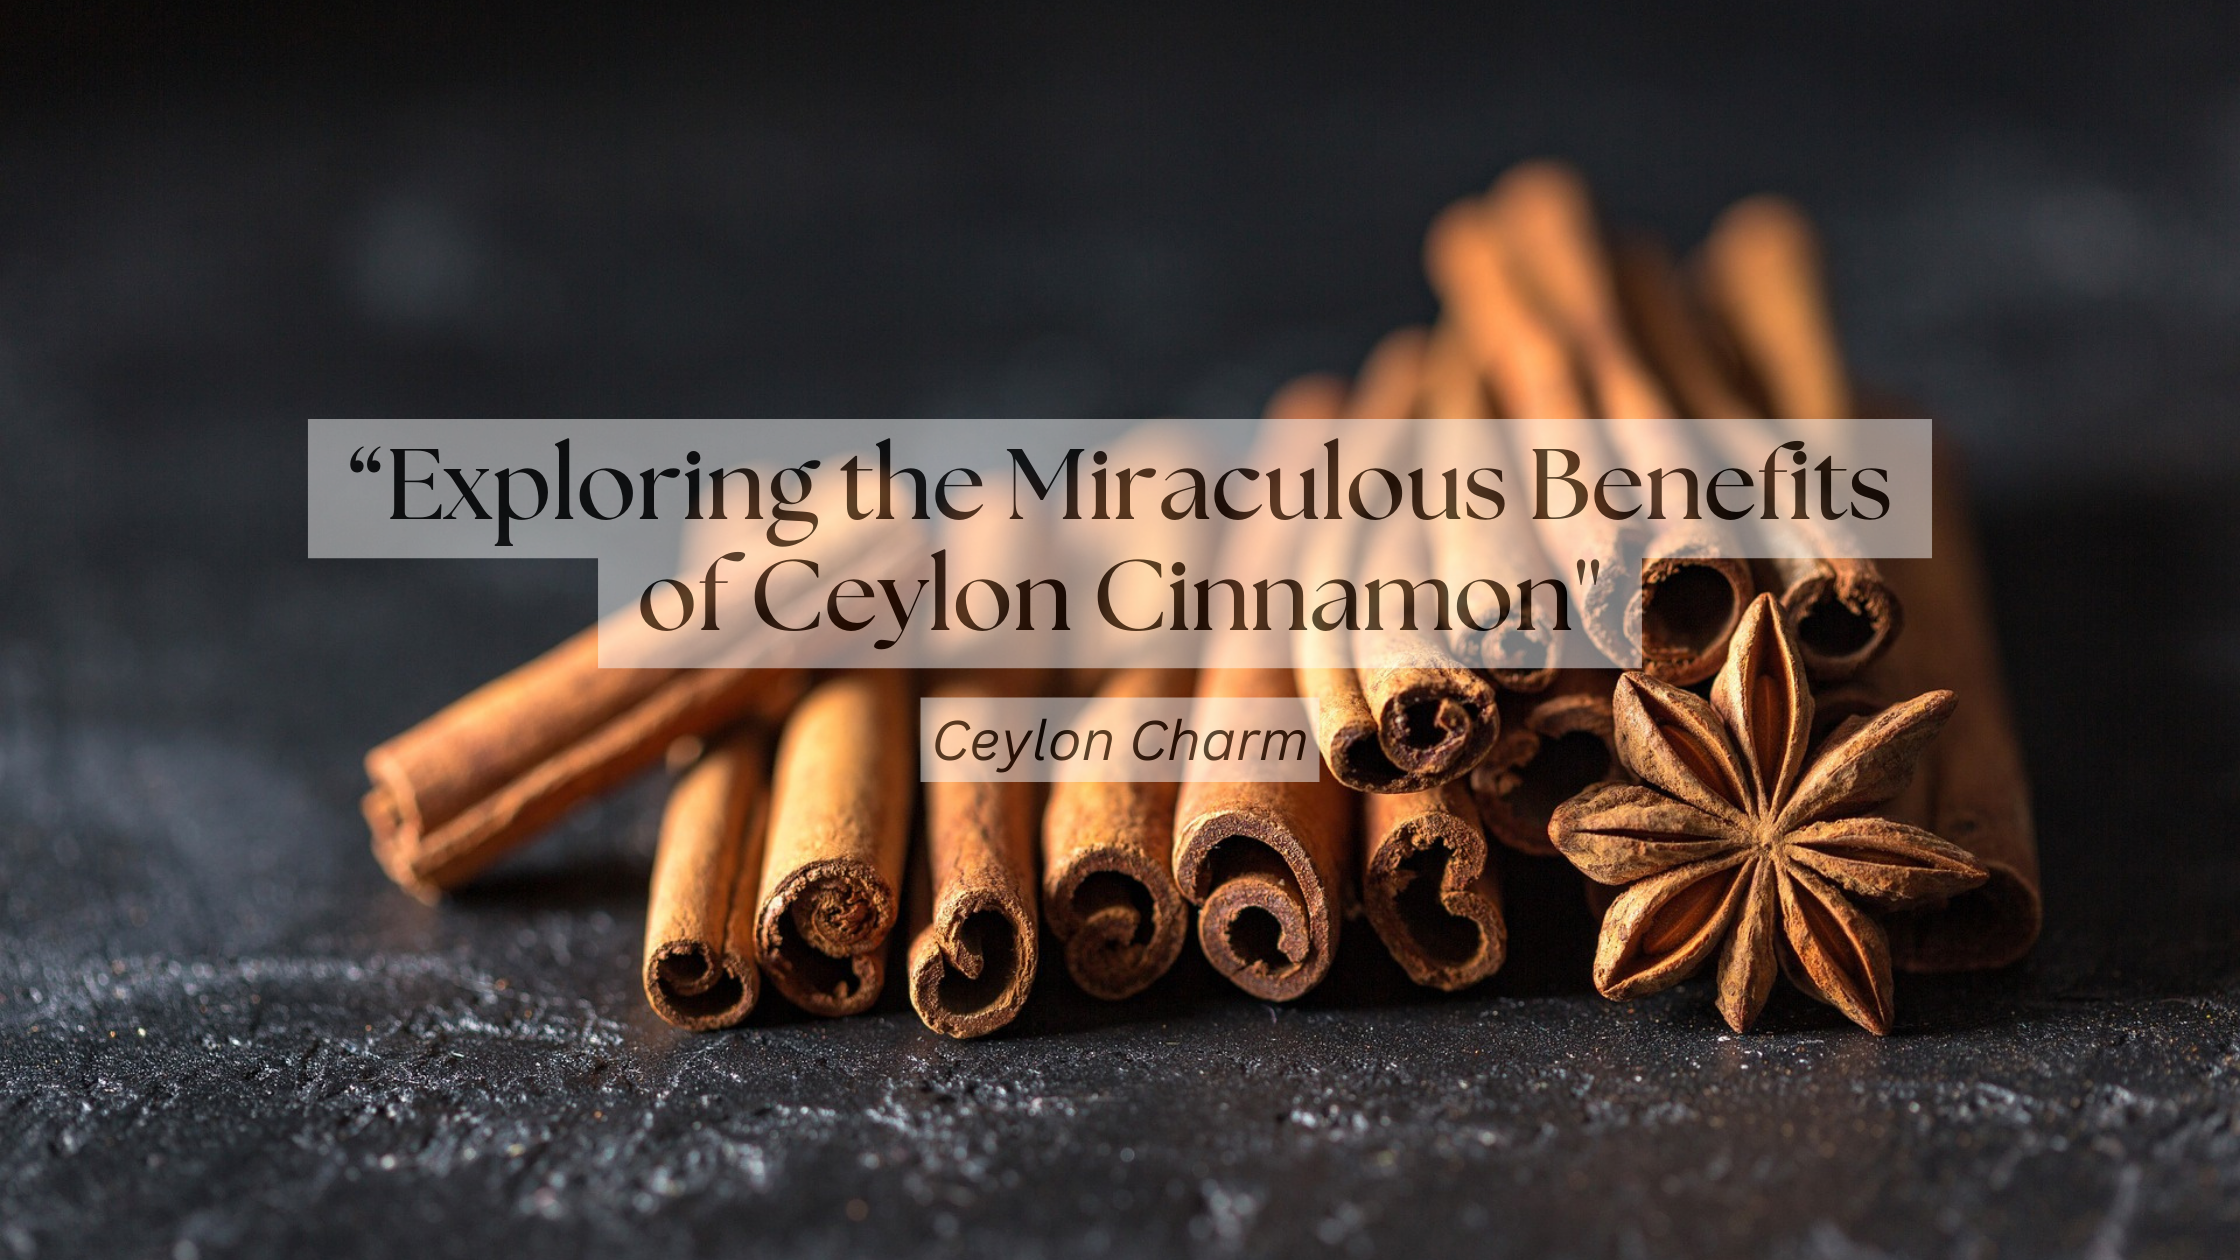 "Spice Up Your Health: Exploring the Miraculous Benefits of Ceylon Cinnamon"